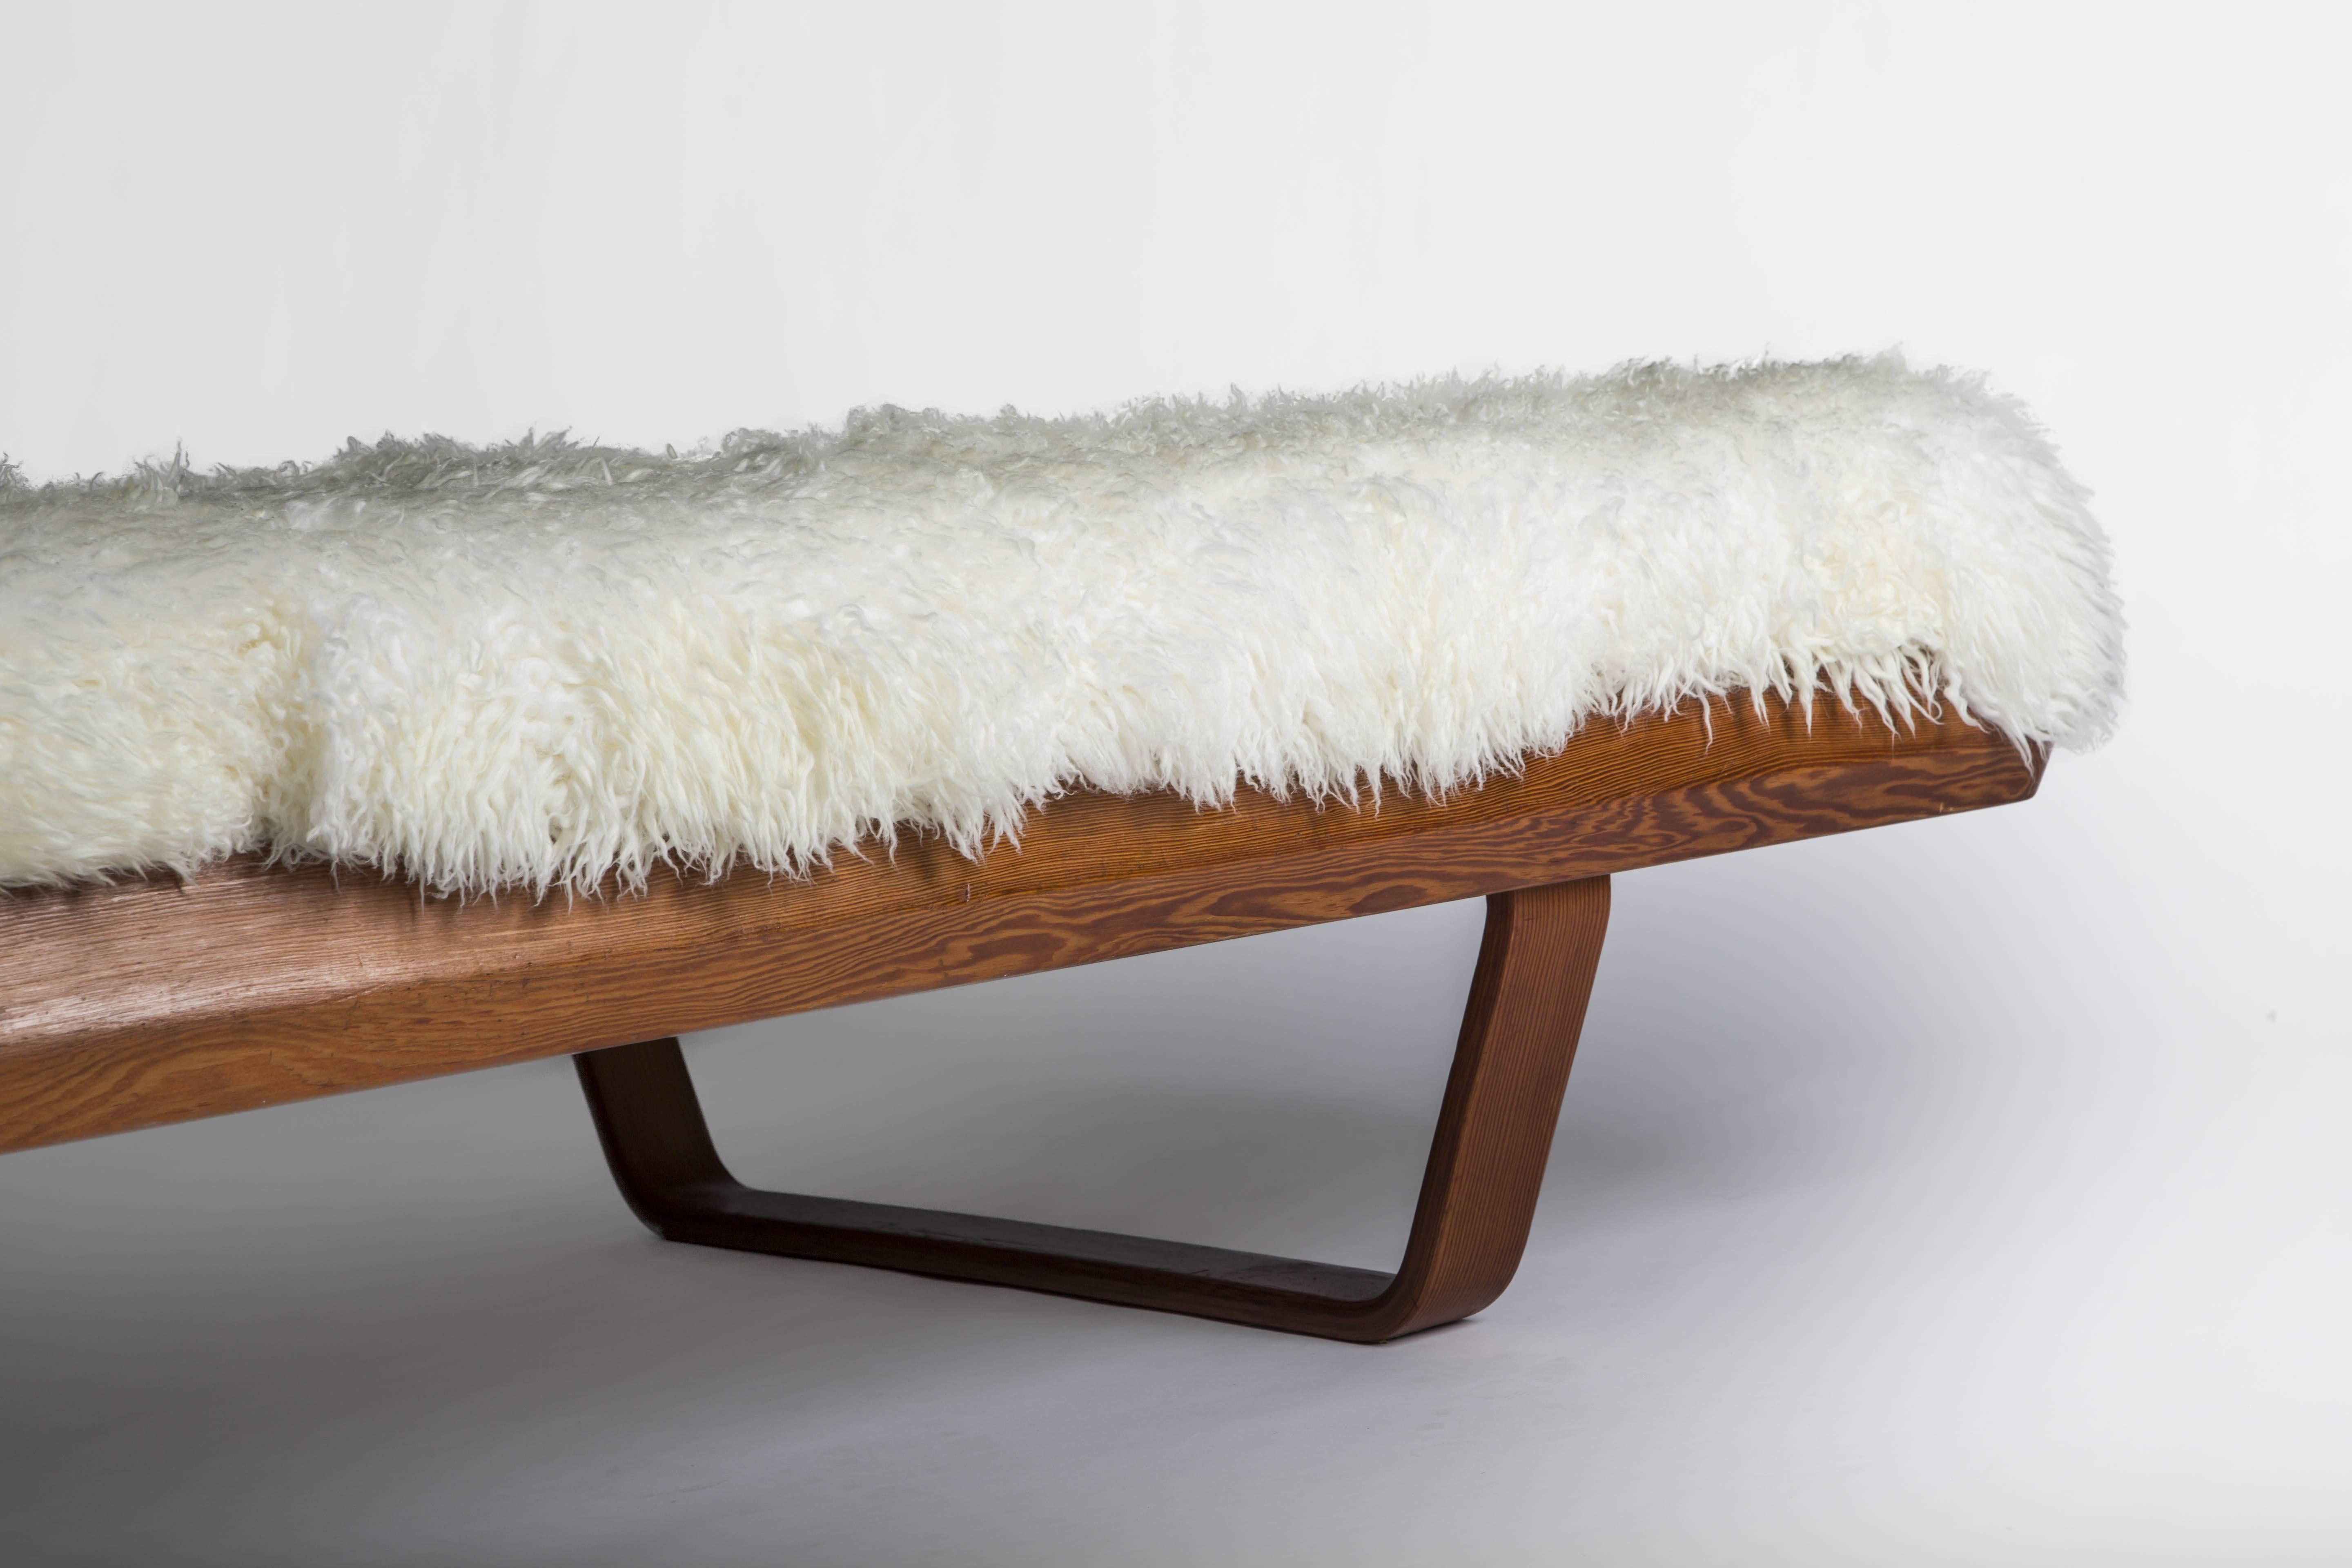 Daybed in Oregon pine, mattress covered in sheep skin.

Danish work by designer Grete Jalk, dated circa 1950.